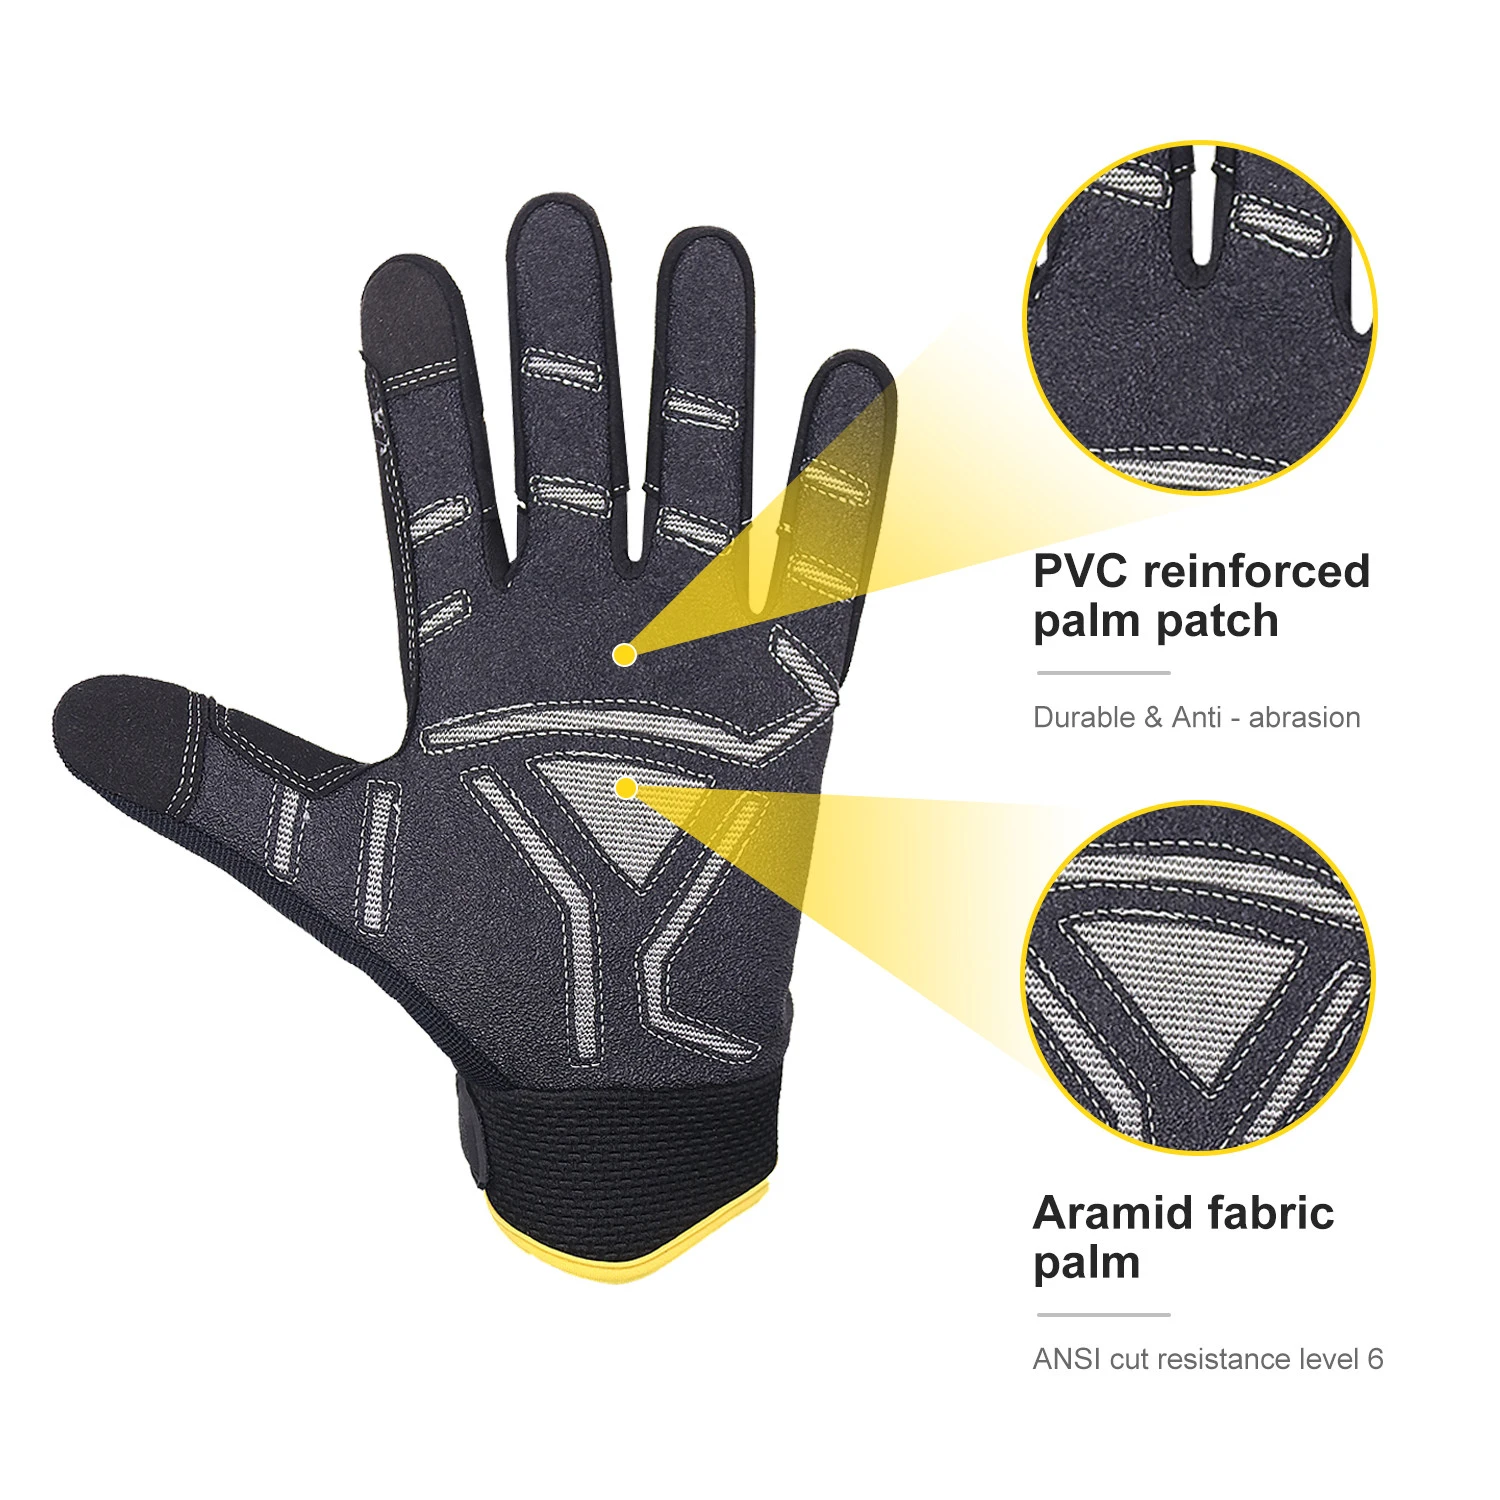 PRISAFETY Ansi Level 6 Cut Resistant High Impact Mining oil and gas gloves cut 5, Mechanic Working Protective oilfield